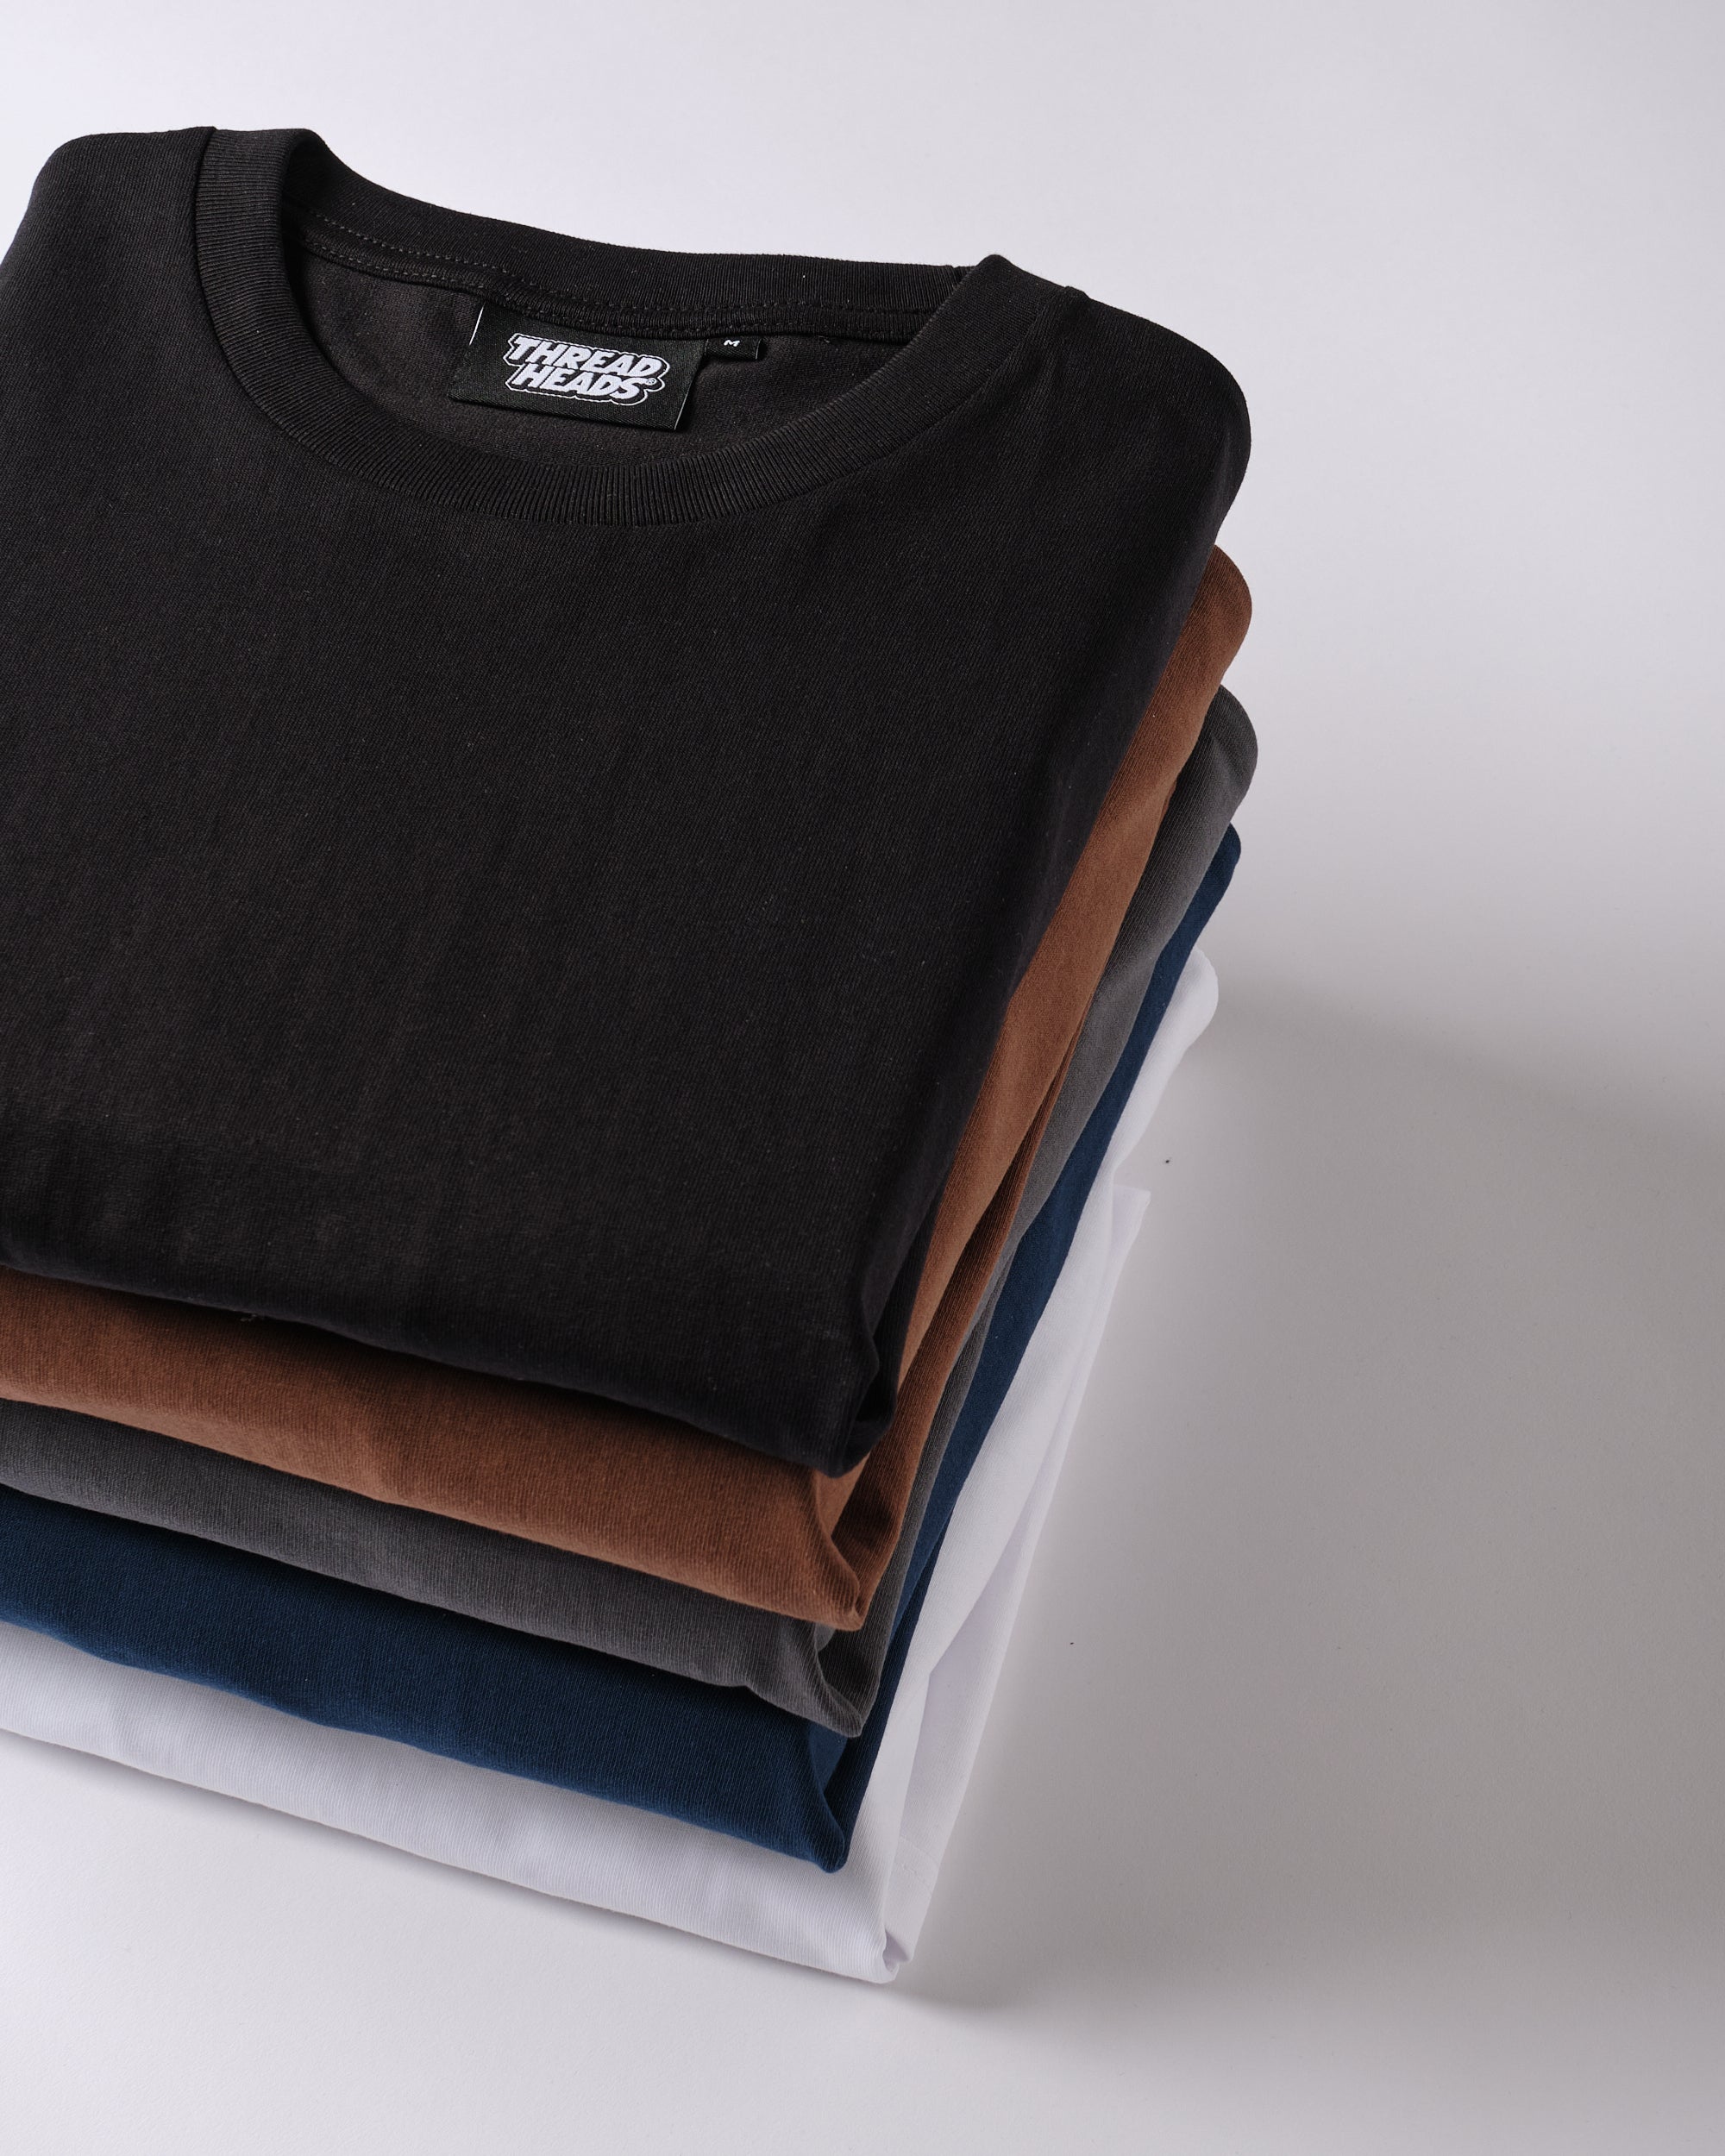 Classic Tee 5-Pack: Black, Brown, Charcoal, Navy, White